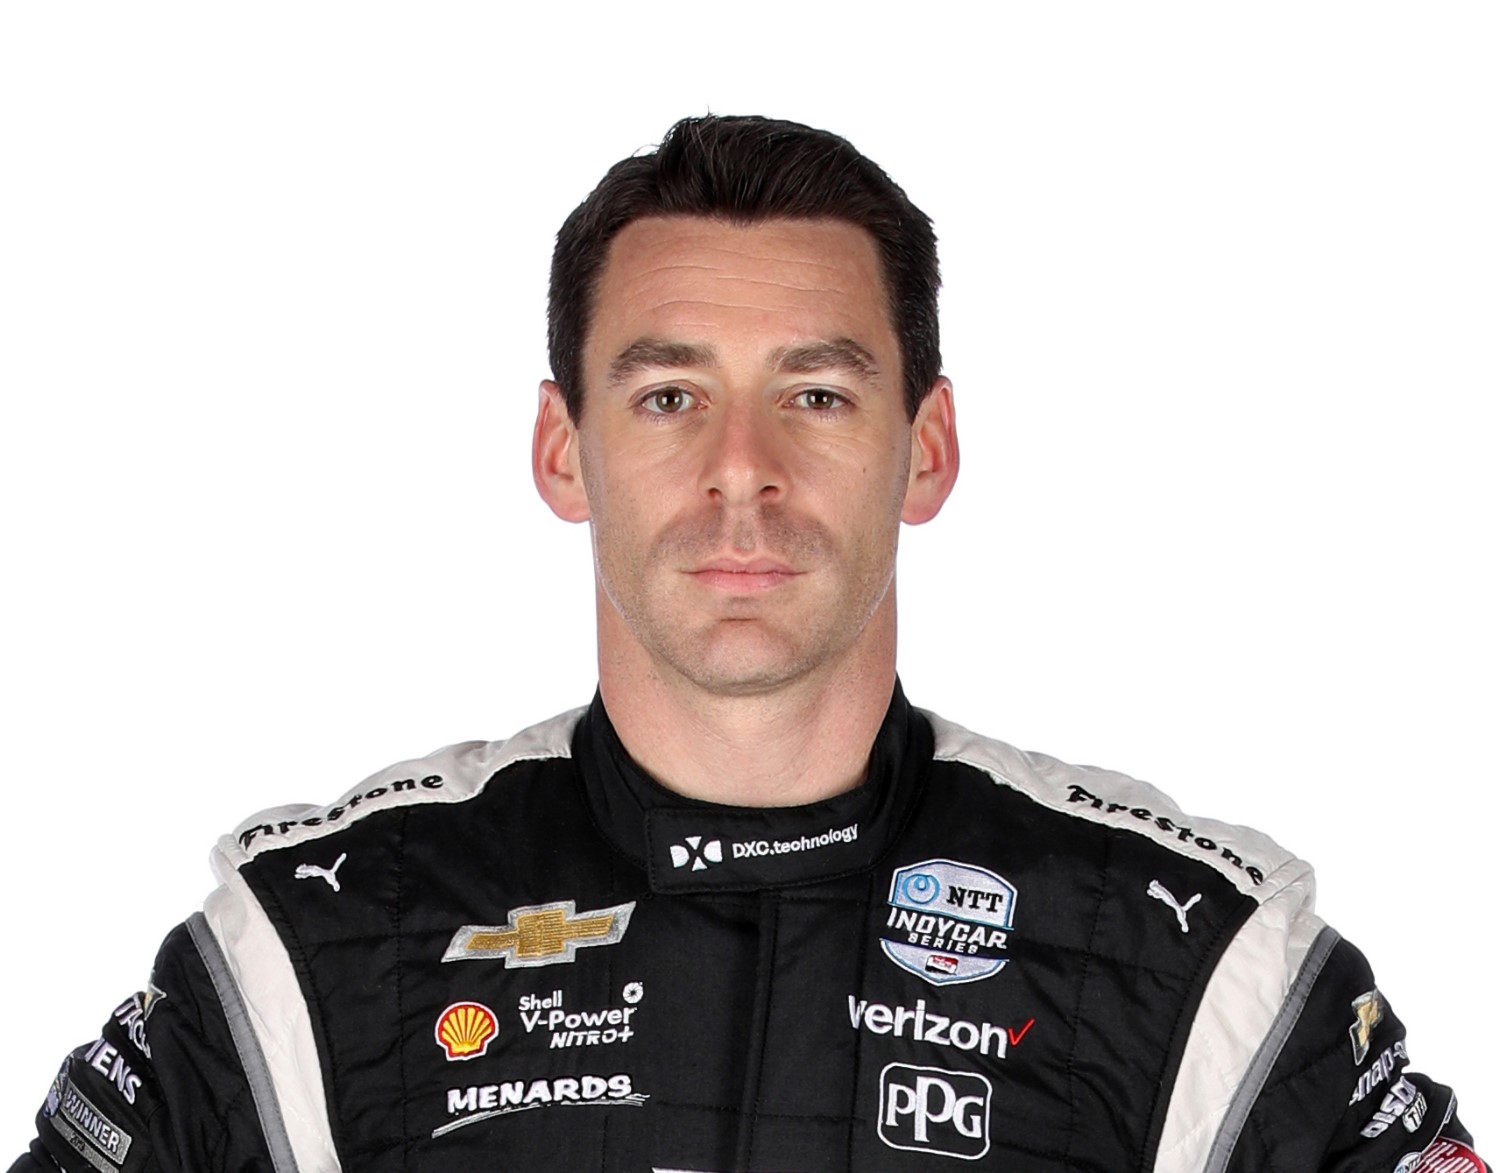 Simon Pagenaud lost a lot of respect with fans after it was revealed he and his engineer plotted to crash Lando Norris out of the lead